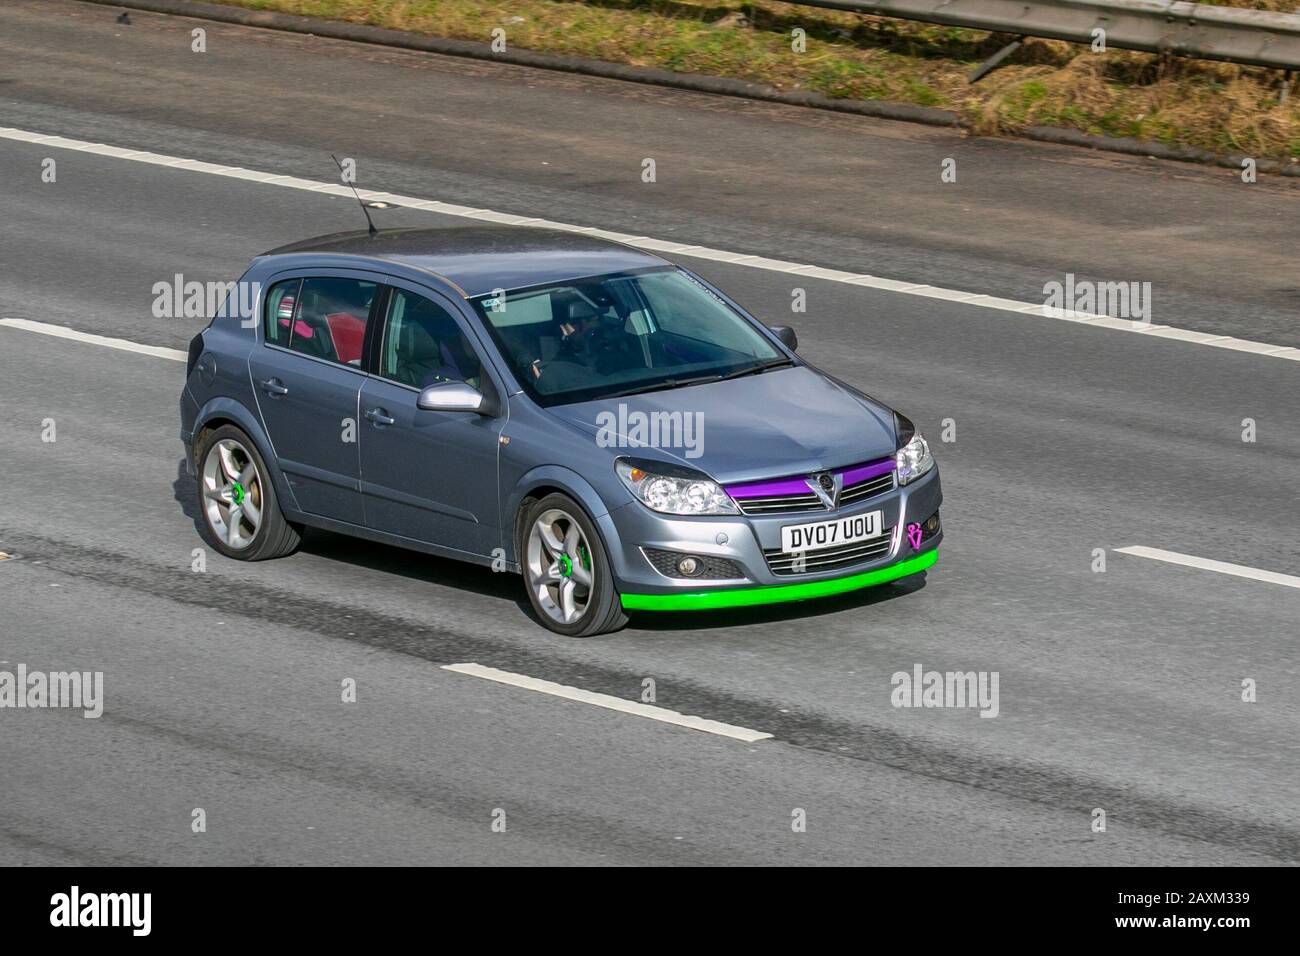 2007 silver Vauxhall Astra Elite with green bumper; UK Vehicular traffic, transport, modern saloon cars, on the M61 motorway, Manchester, UK Stock Photo